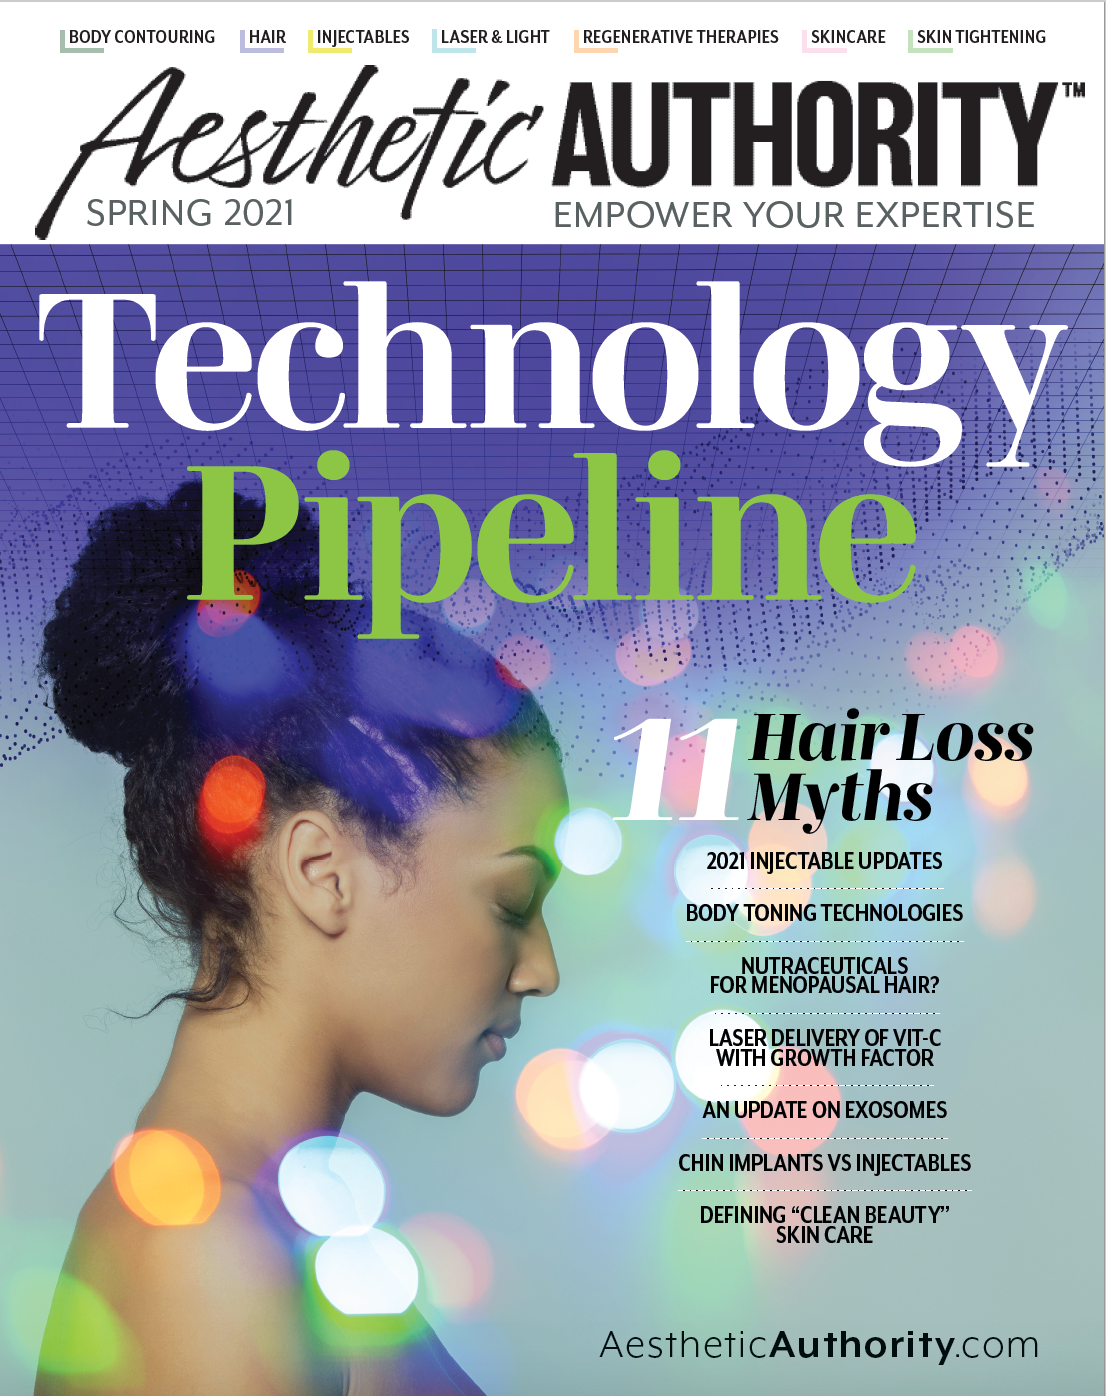 Technology Pipeline: Aesthetic Authority Vol. 2: No. 1